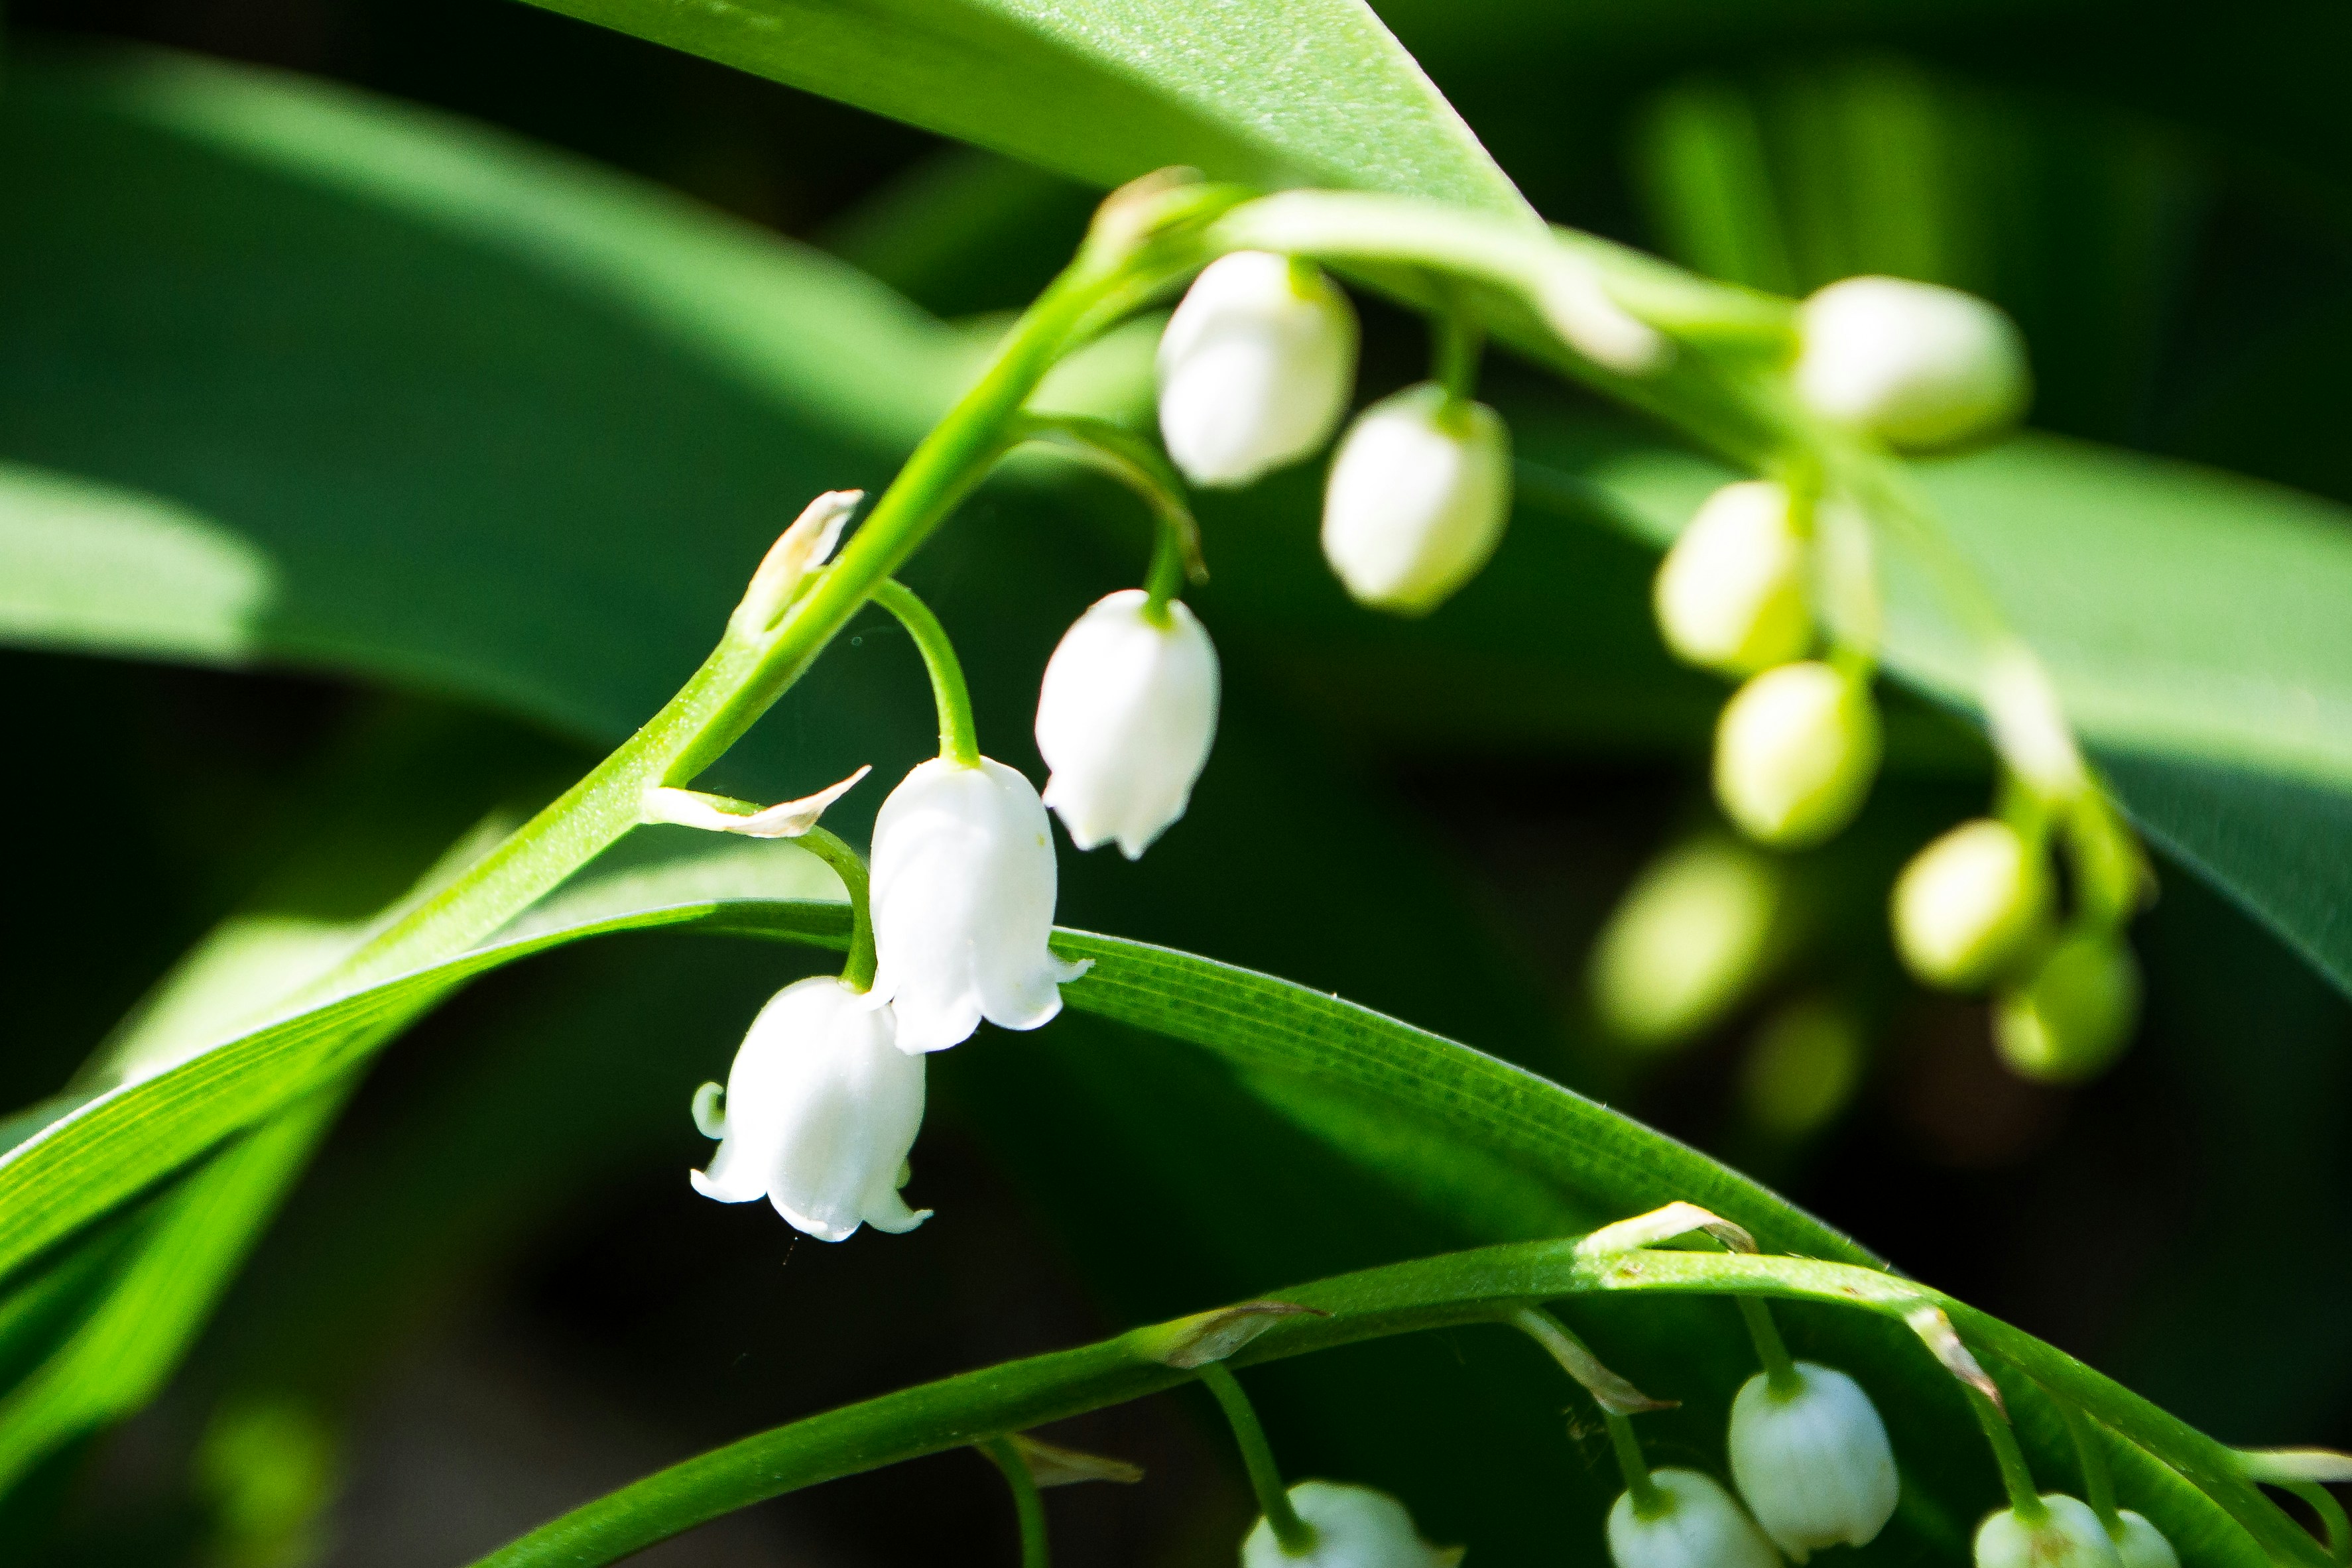 Lilies of the valley